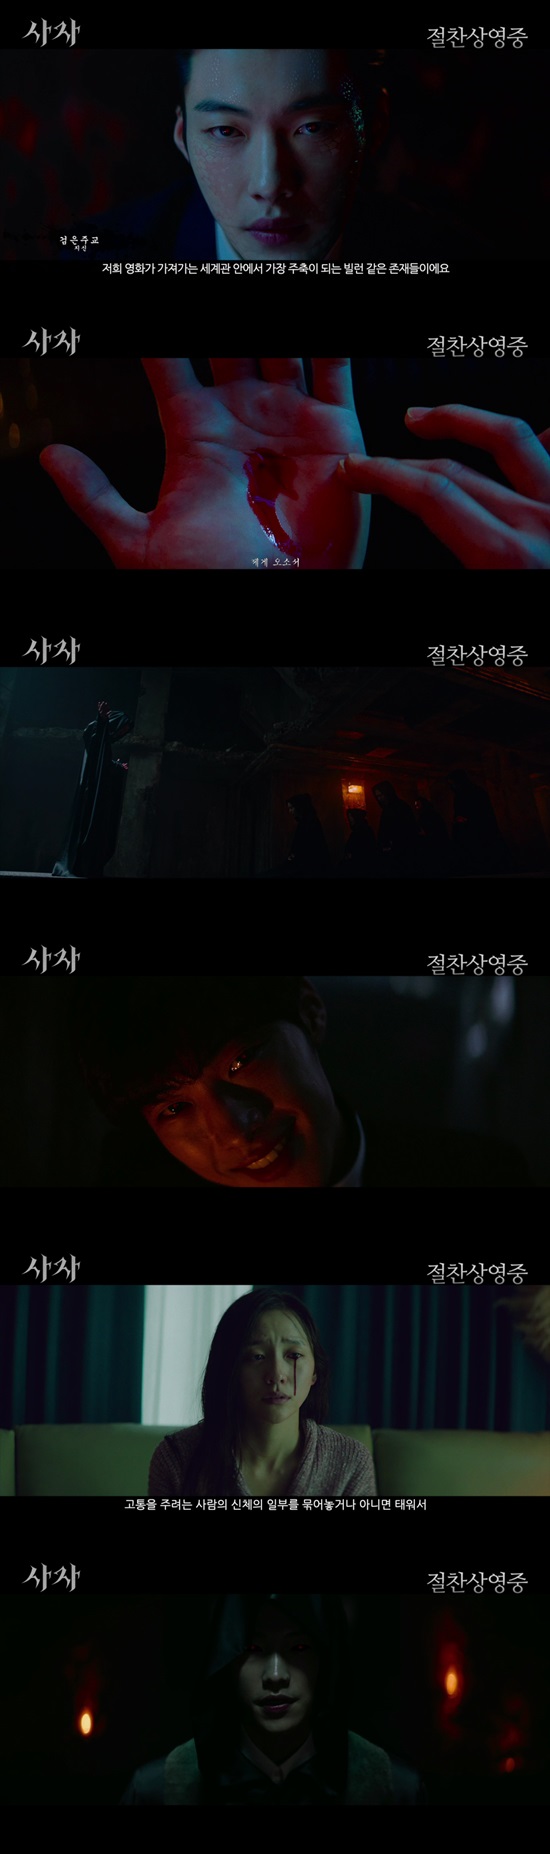 The movie The Lion (director Kim Joo-hwan) released a SEK video of The World of Lion fantasy -Part 1. The World of Evil that can confirm World of SEK evil in the movie.The Lion is a film about the story of the martial arts champion Yonghu (Park Seo-jun) meeting the Kuma priest Anshinbu (An Sung-ki) and confronting the powerful evil (), which has confLee Yongd World.First, director Kim Joo-hwan said, They are like Billen, who is the most important person in the movie. The black bishop Jishin overwhelms his gaze with intense visuals shining like red-tinged eyes and snake scales.The secret consciousness toward the existence of Jisin Yiak, who Lee Yong black magic using supernatural power for malicious and selfish purposes, amplifies the curiosity of the SEK ability of Jisin in the movie.Here, director Kim Joo-hwan said, It is a secret person who approaches people who are not believed or have a weak mind and seduces them. The appearance of Ji-shin, who has excellent talent to penetrate and Lee Yong the weakness of the opponent, approaches the child in danger, doubling the tension of the viewer.Kim Joo-hwan, director of the Jishin, who devotes his soul to the underground altar and threatens his father with pain, said, It is a tool like black magic that can Lee Yong pain to the person at a distance by tying or burning a part of the body of the person who curses, harms or tries to Lee Yong pain.The lion, which has built up World of evil through such colorful settings and doubled the fun of the movie, captivates the audience with intense and new attractions that stimulate fantasy imagination.The Lion is being screened at theaters across the country.Photo = Lotte Entertainment